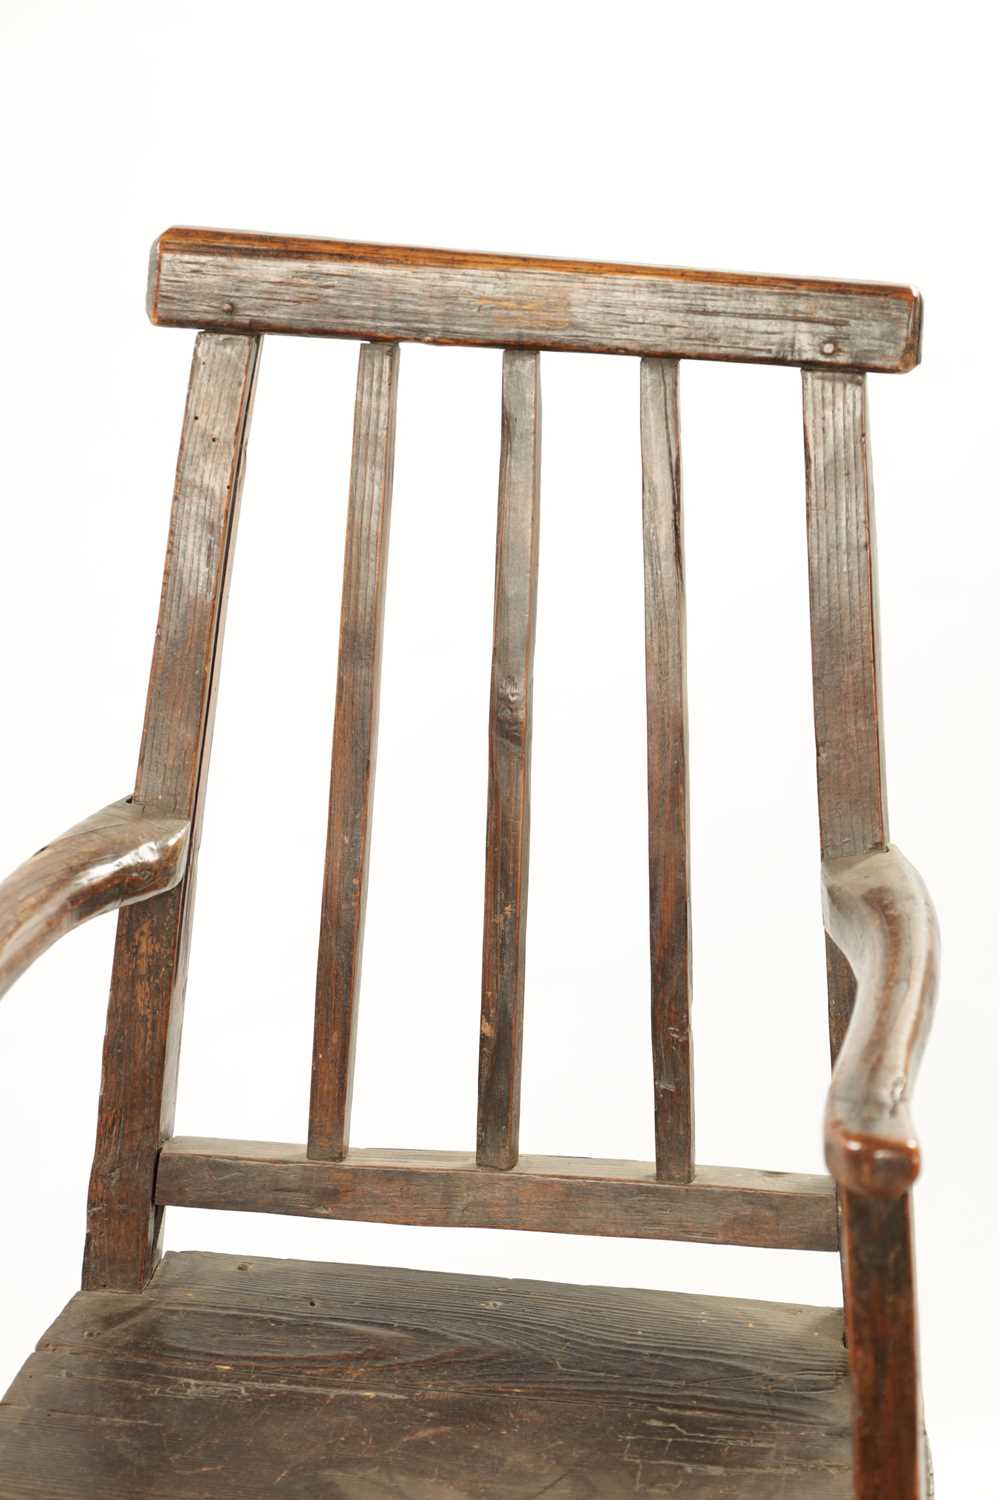 A PRIMITIVE 18TH CENTURY CHILDS FRUITWOOD SPLAT BACK HIGH CHAIR - Image 3 of 7